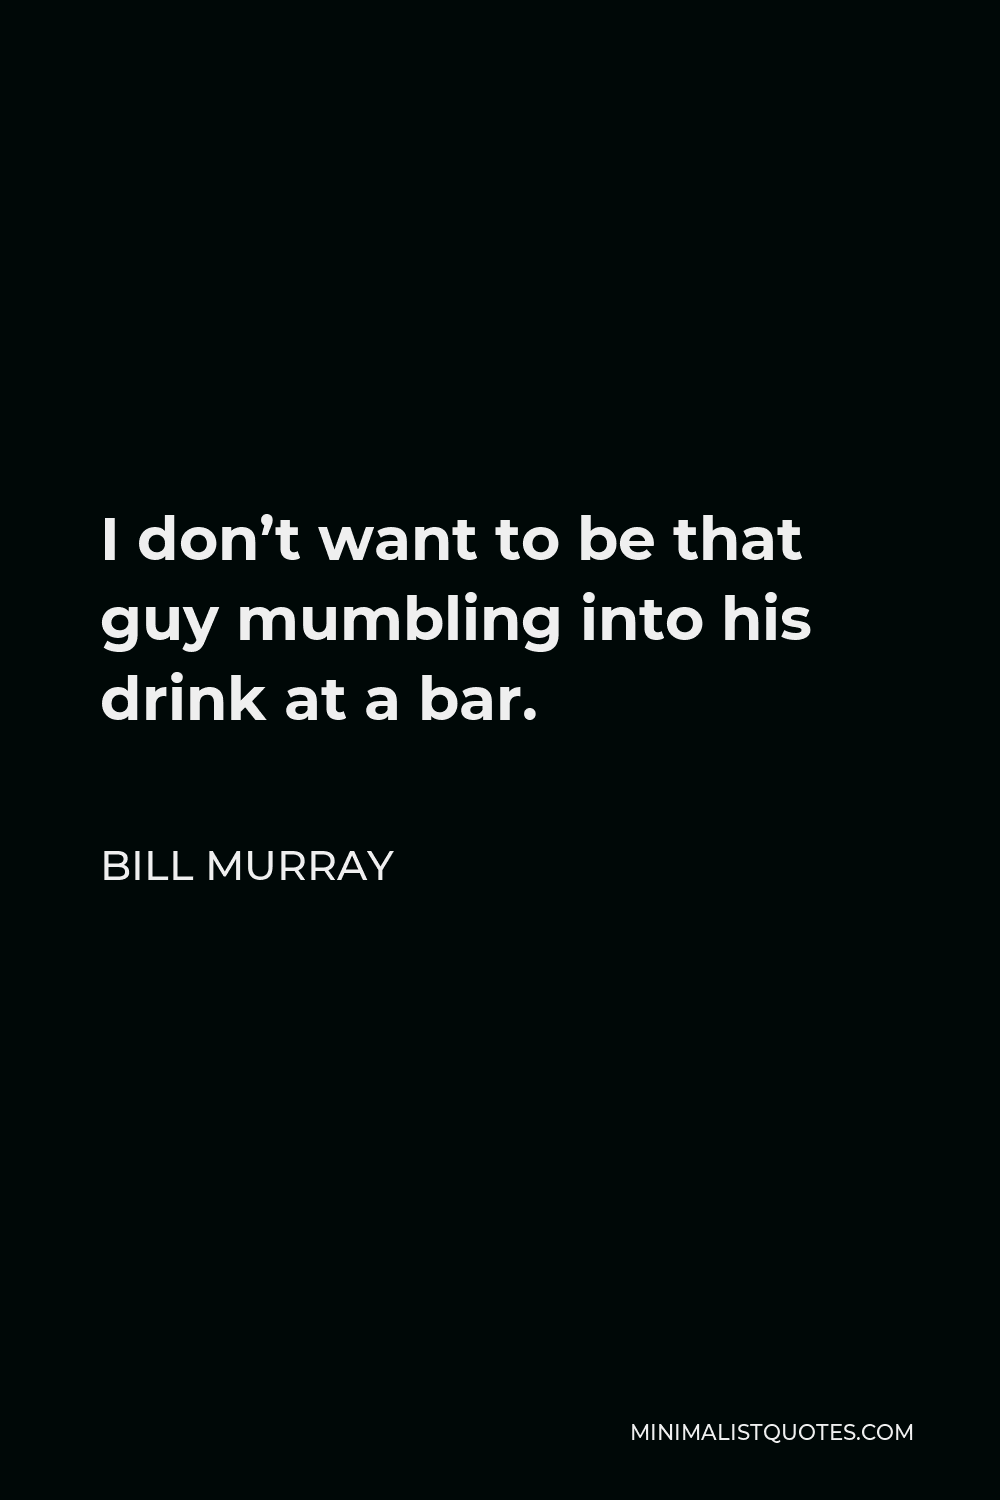 Bill Murray Quote - I don’t want to be that guy mumbling into his drink at a bar.